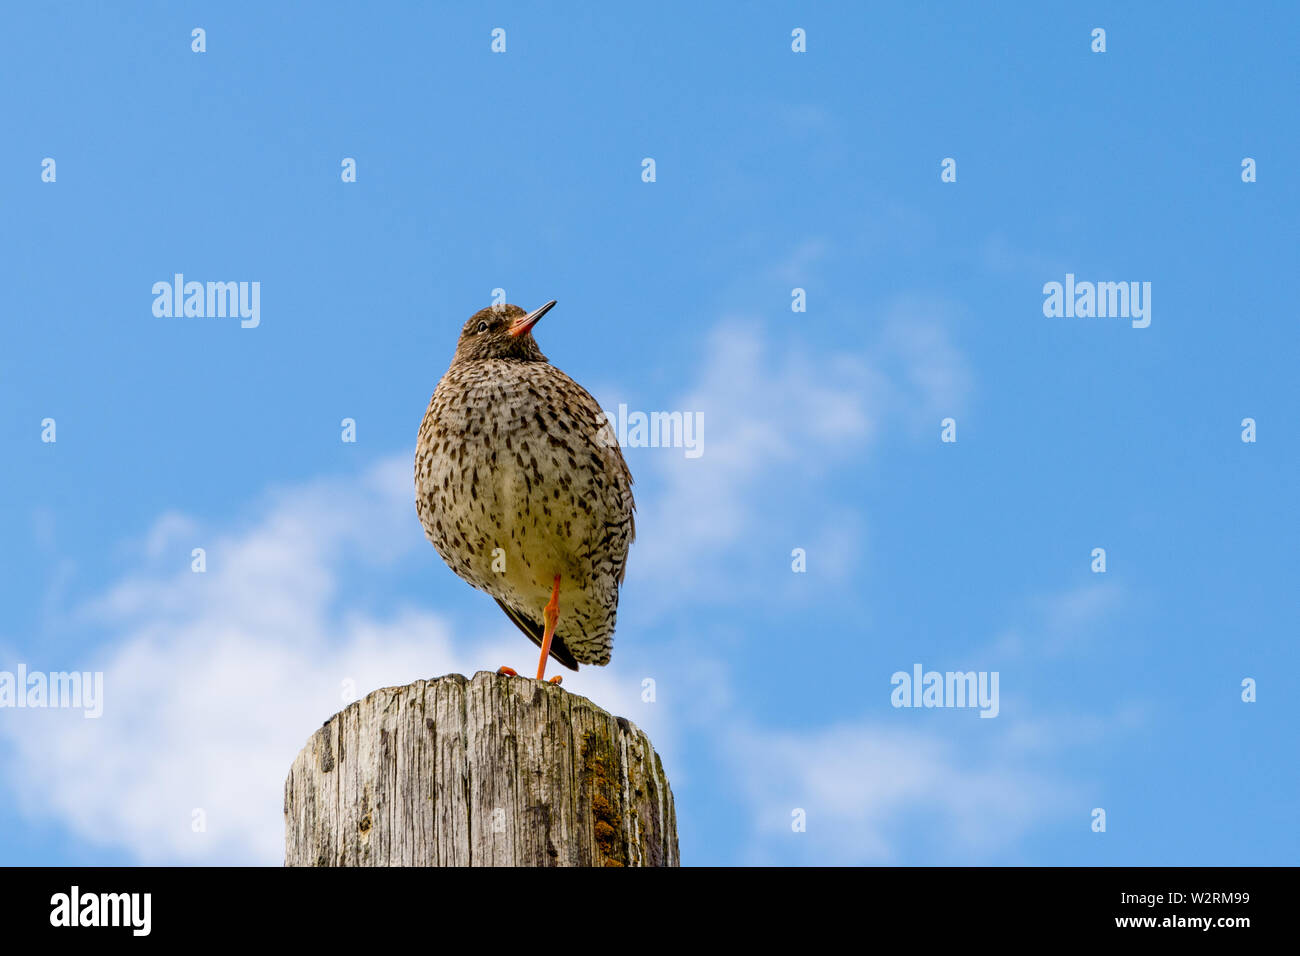 Common Redshank ((Tringa totanus) sitting on a pole with one foot, looking right, blue sky and clouds Stock Photo